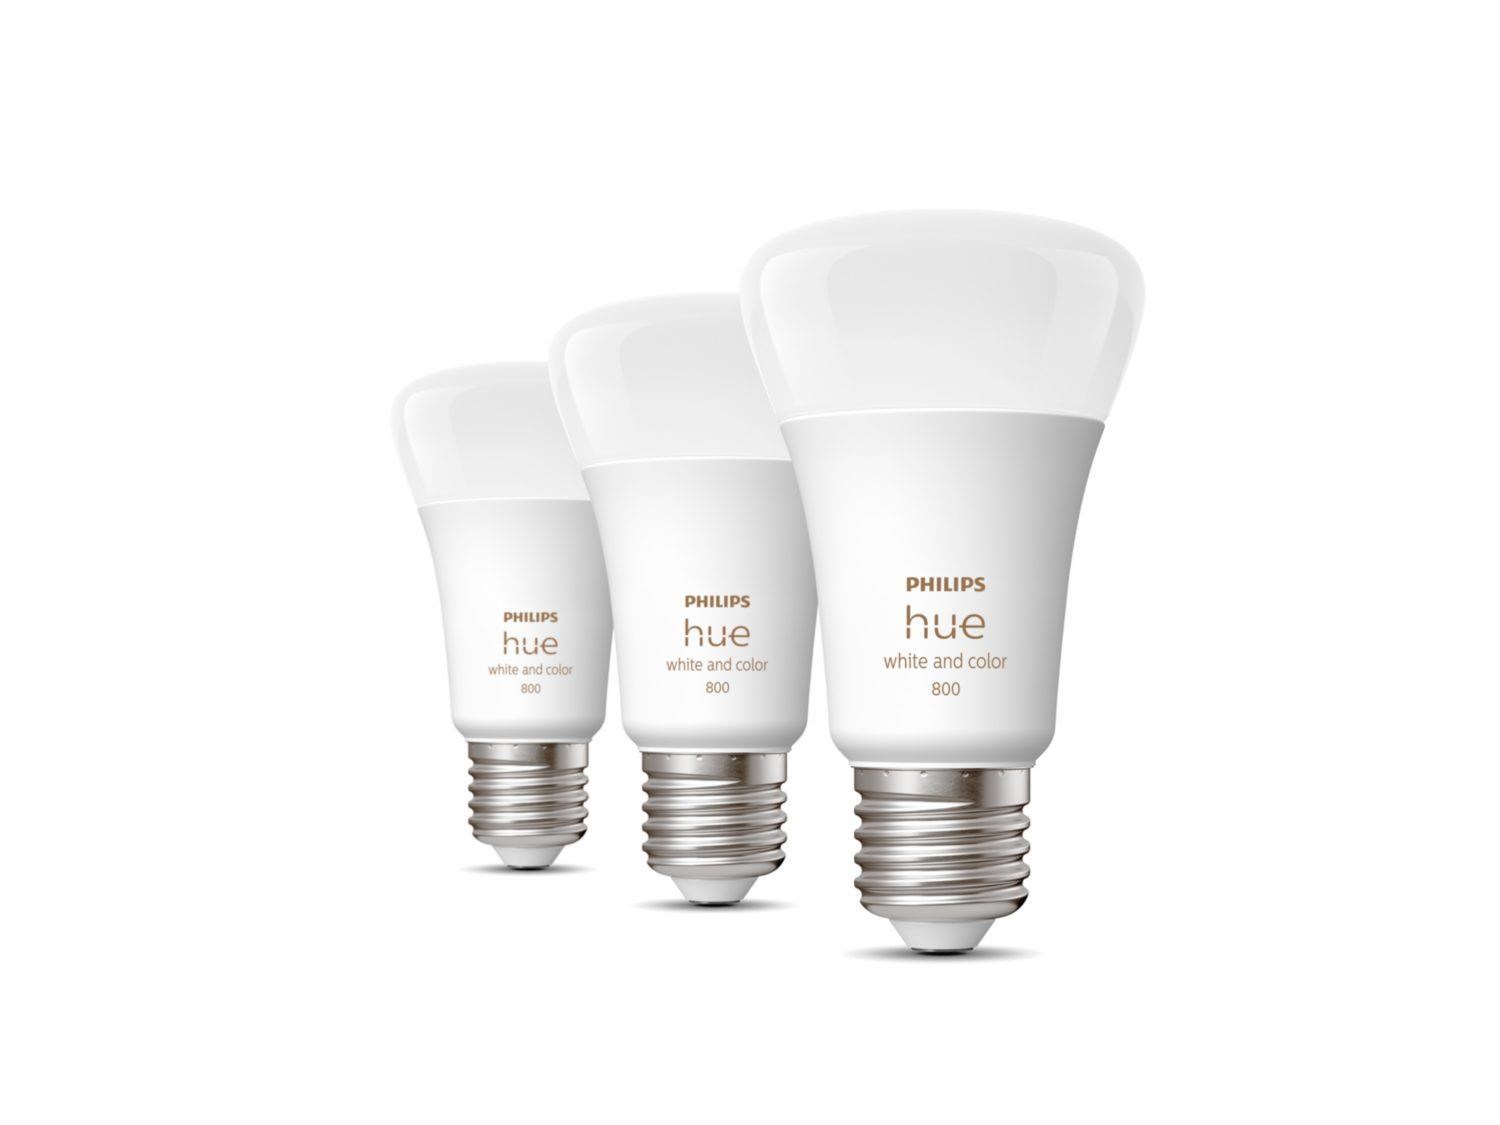 hvid Bytte Berri PHILIPS Hue White and Color Ambiance 6.5W 800 E27 3ks | eD system a.s.